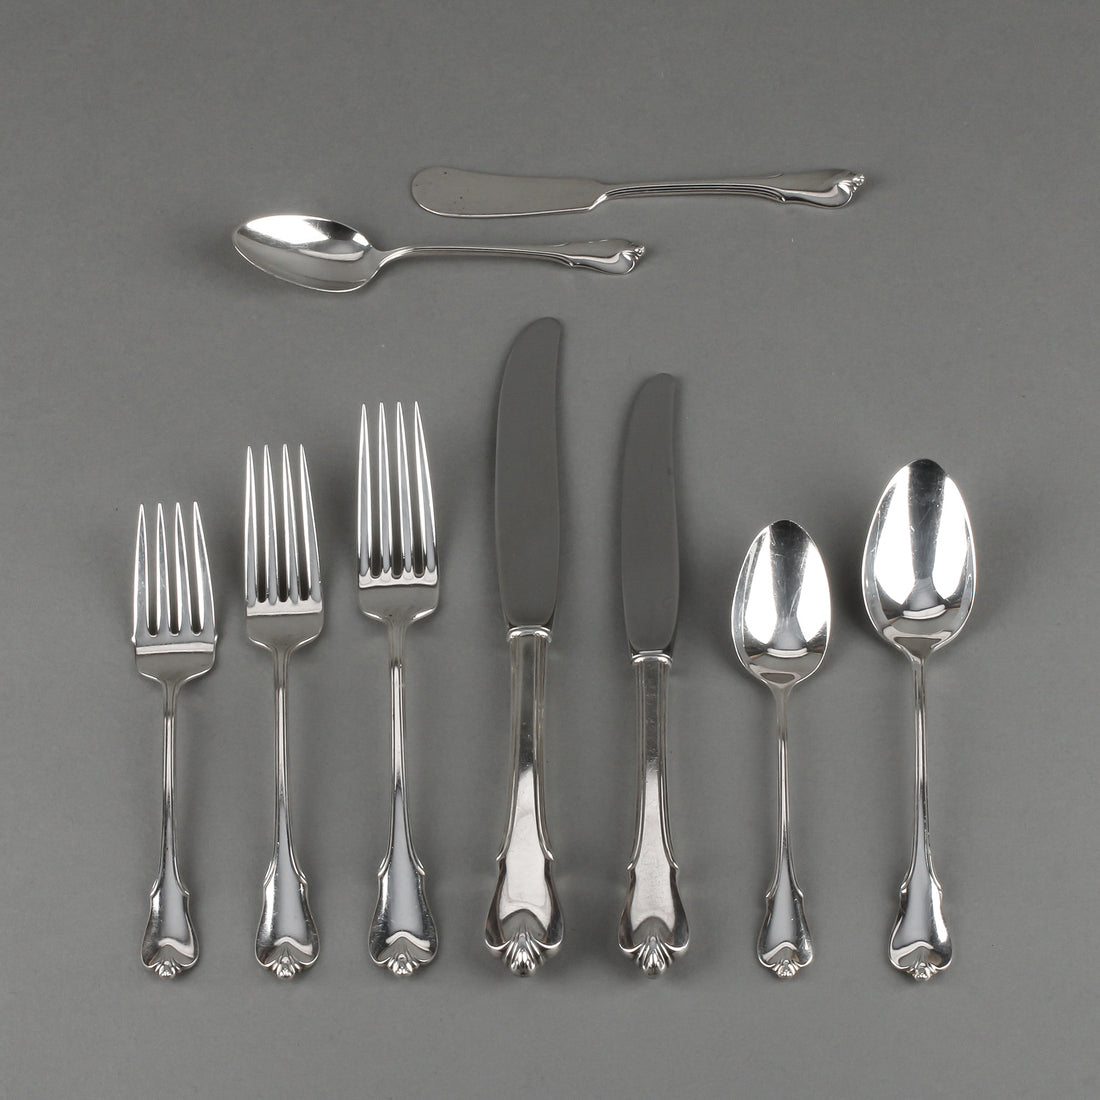 WALLACE Grand Colonial Sterling Silver Flatware - 59 Pieces